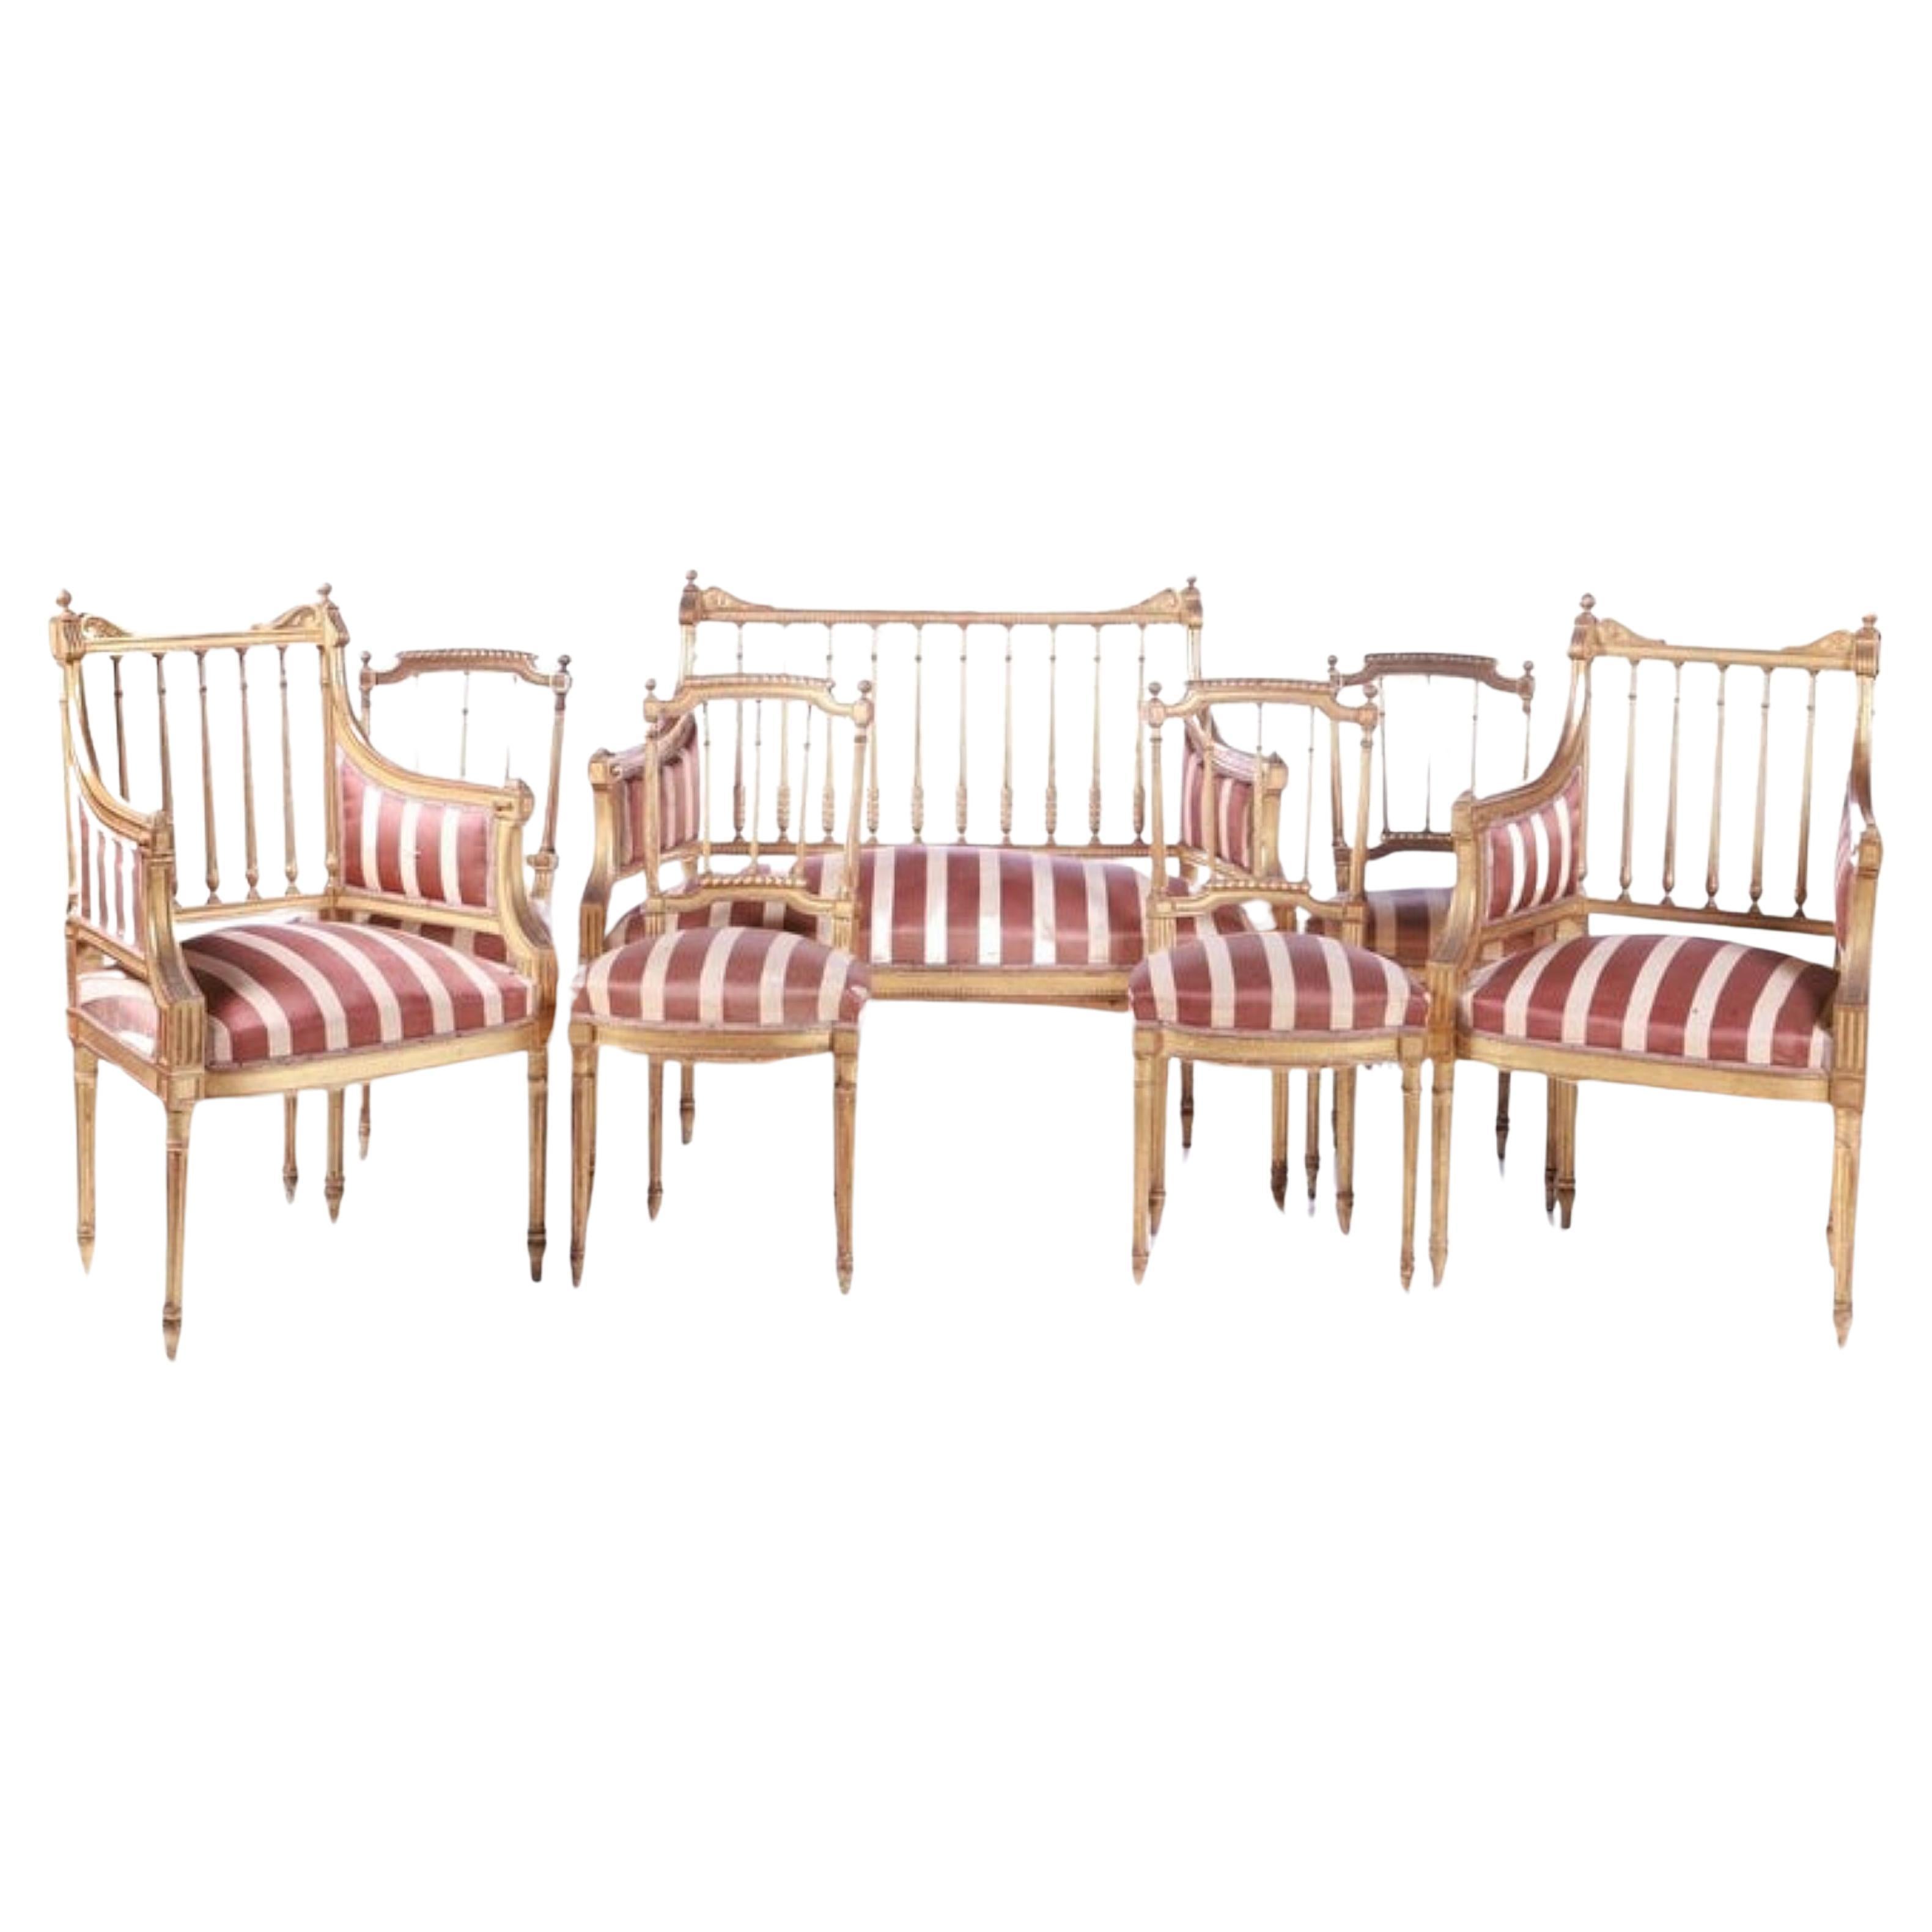 French Canape Set, 4 Chairs and 2 Armchairs Late 19th Century Early 20th Century